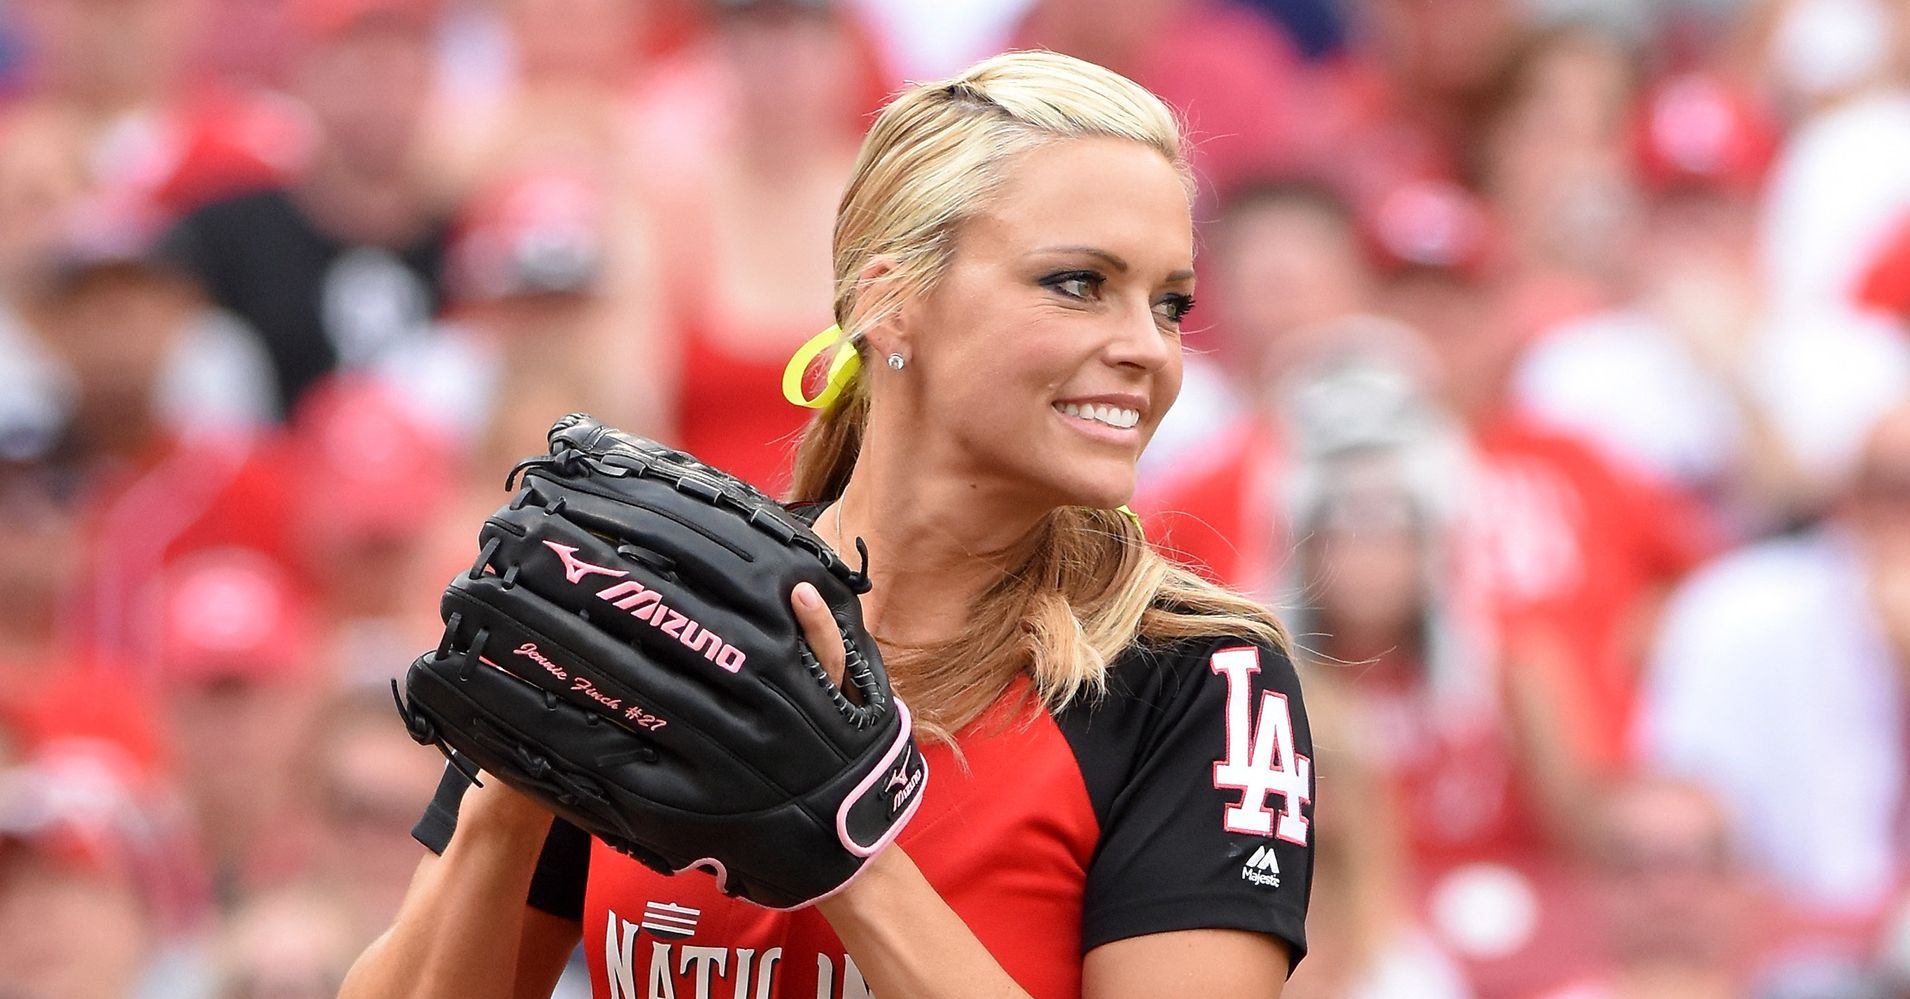 Jennie Finch Will Be The First Woman To Manage A Pro Baseball Team